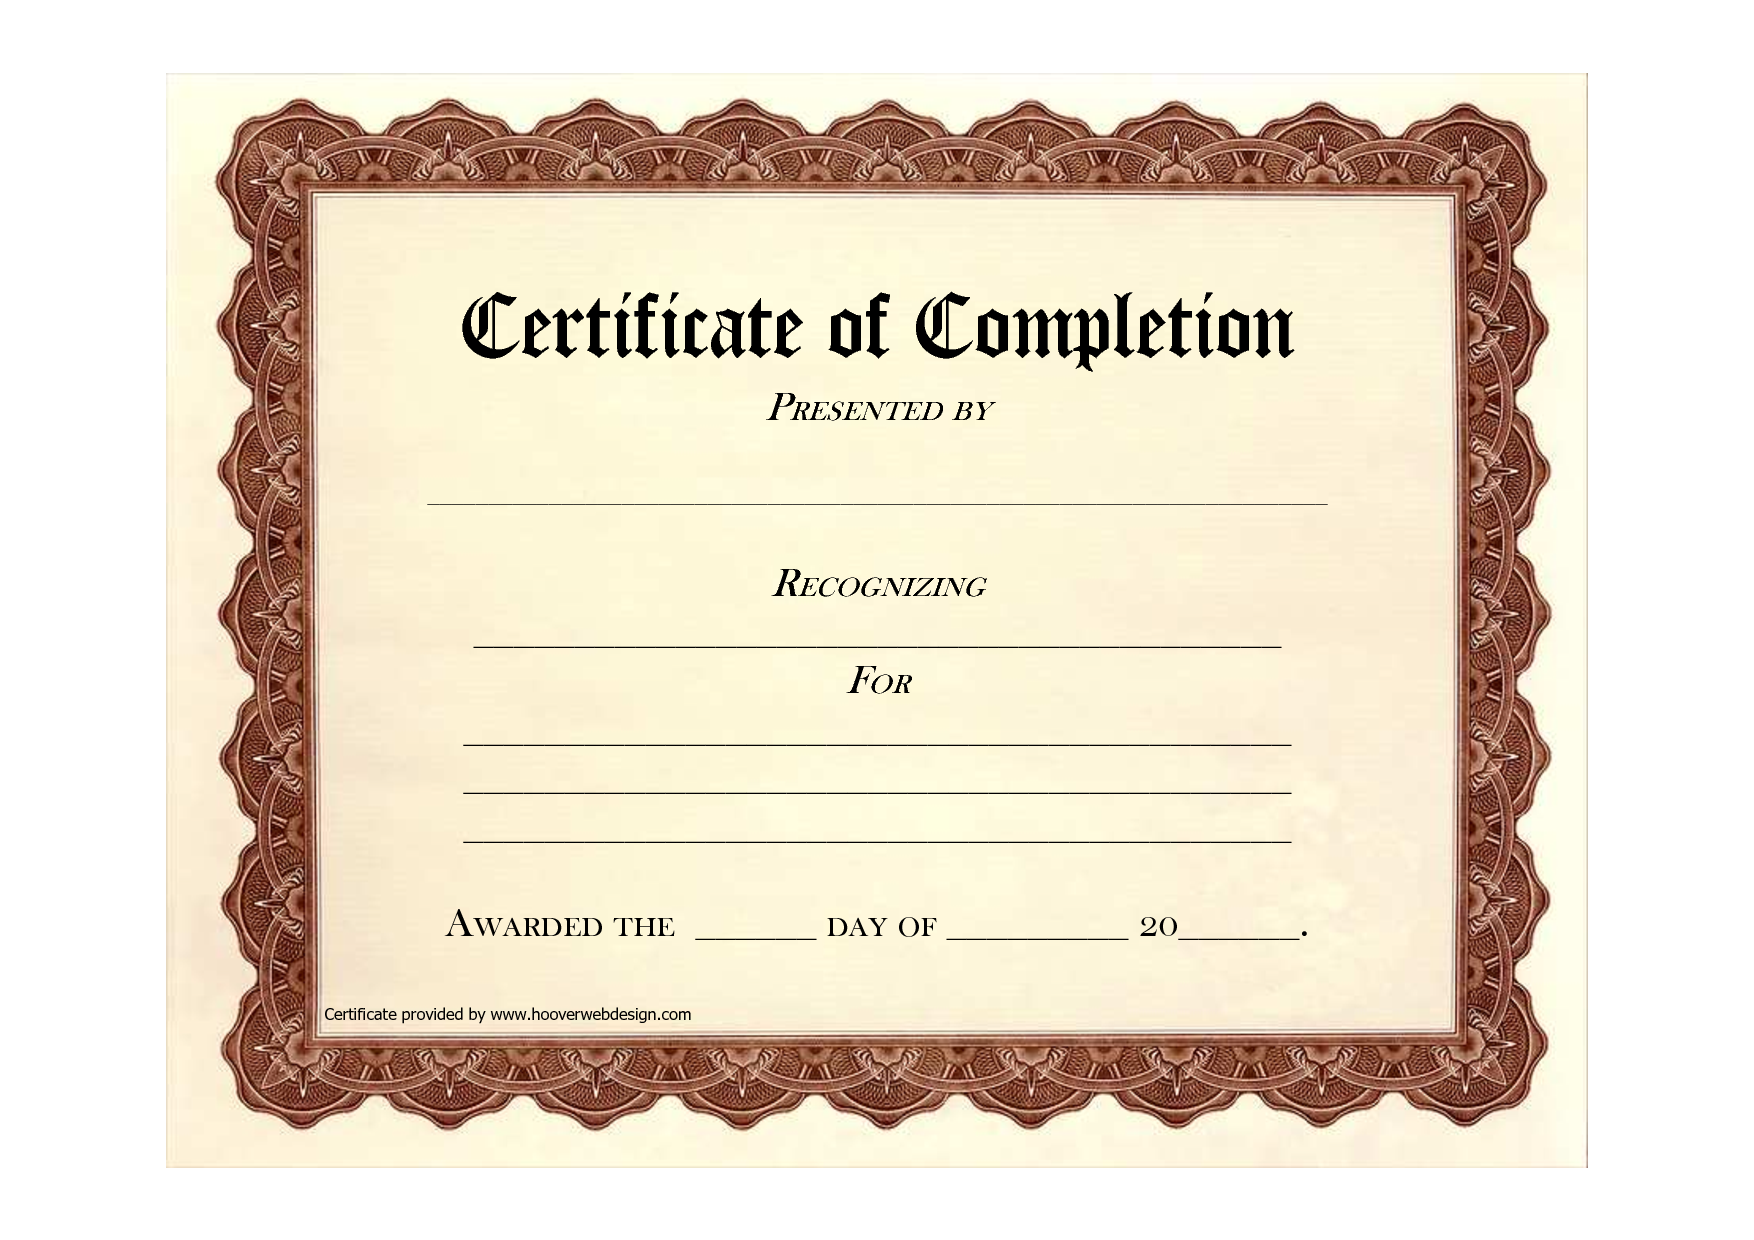 10-certificate-of-completion-templates-free-download-images-free-word